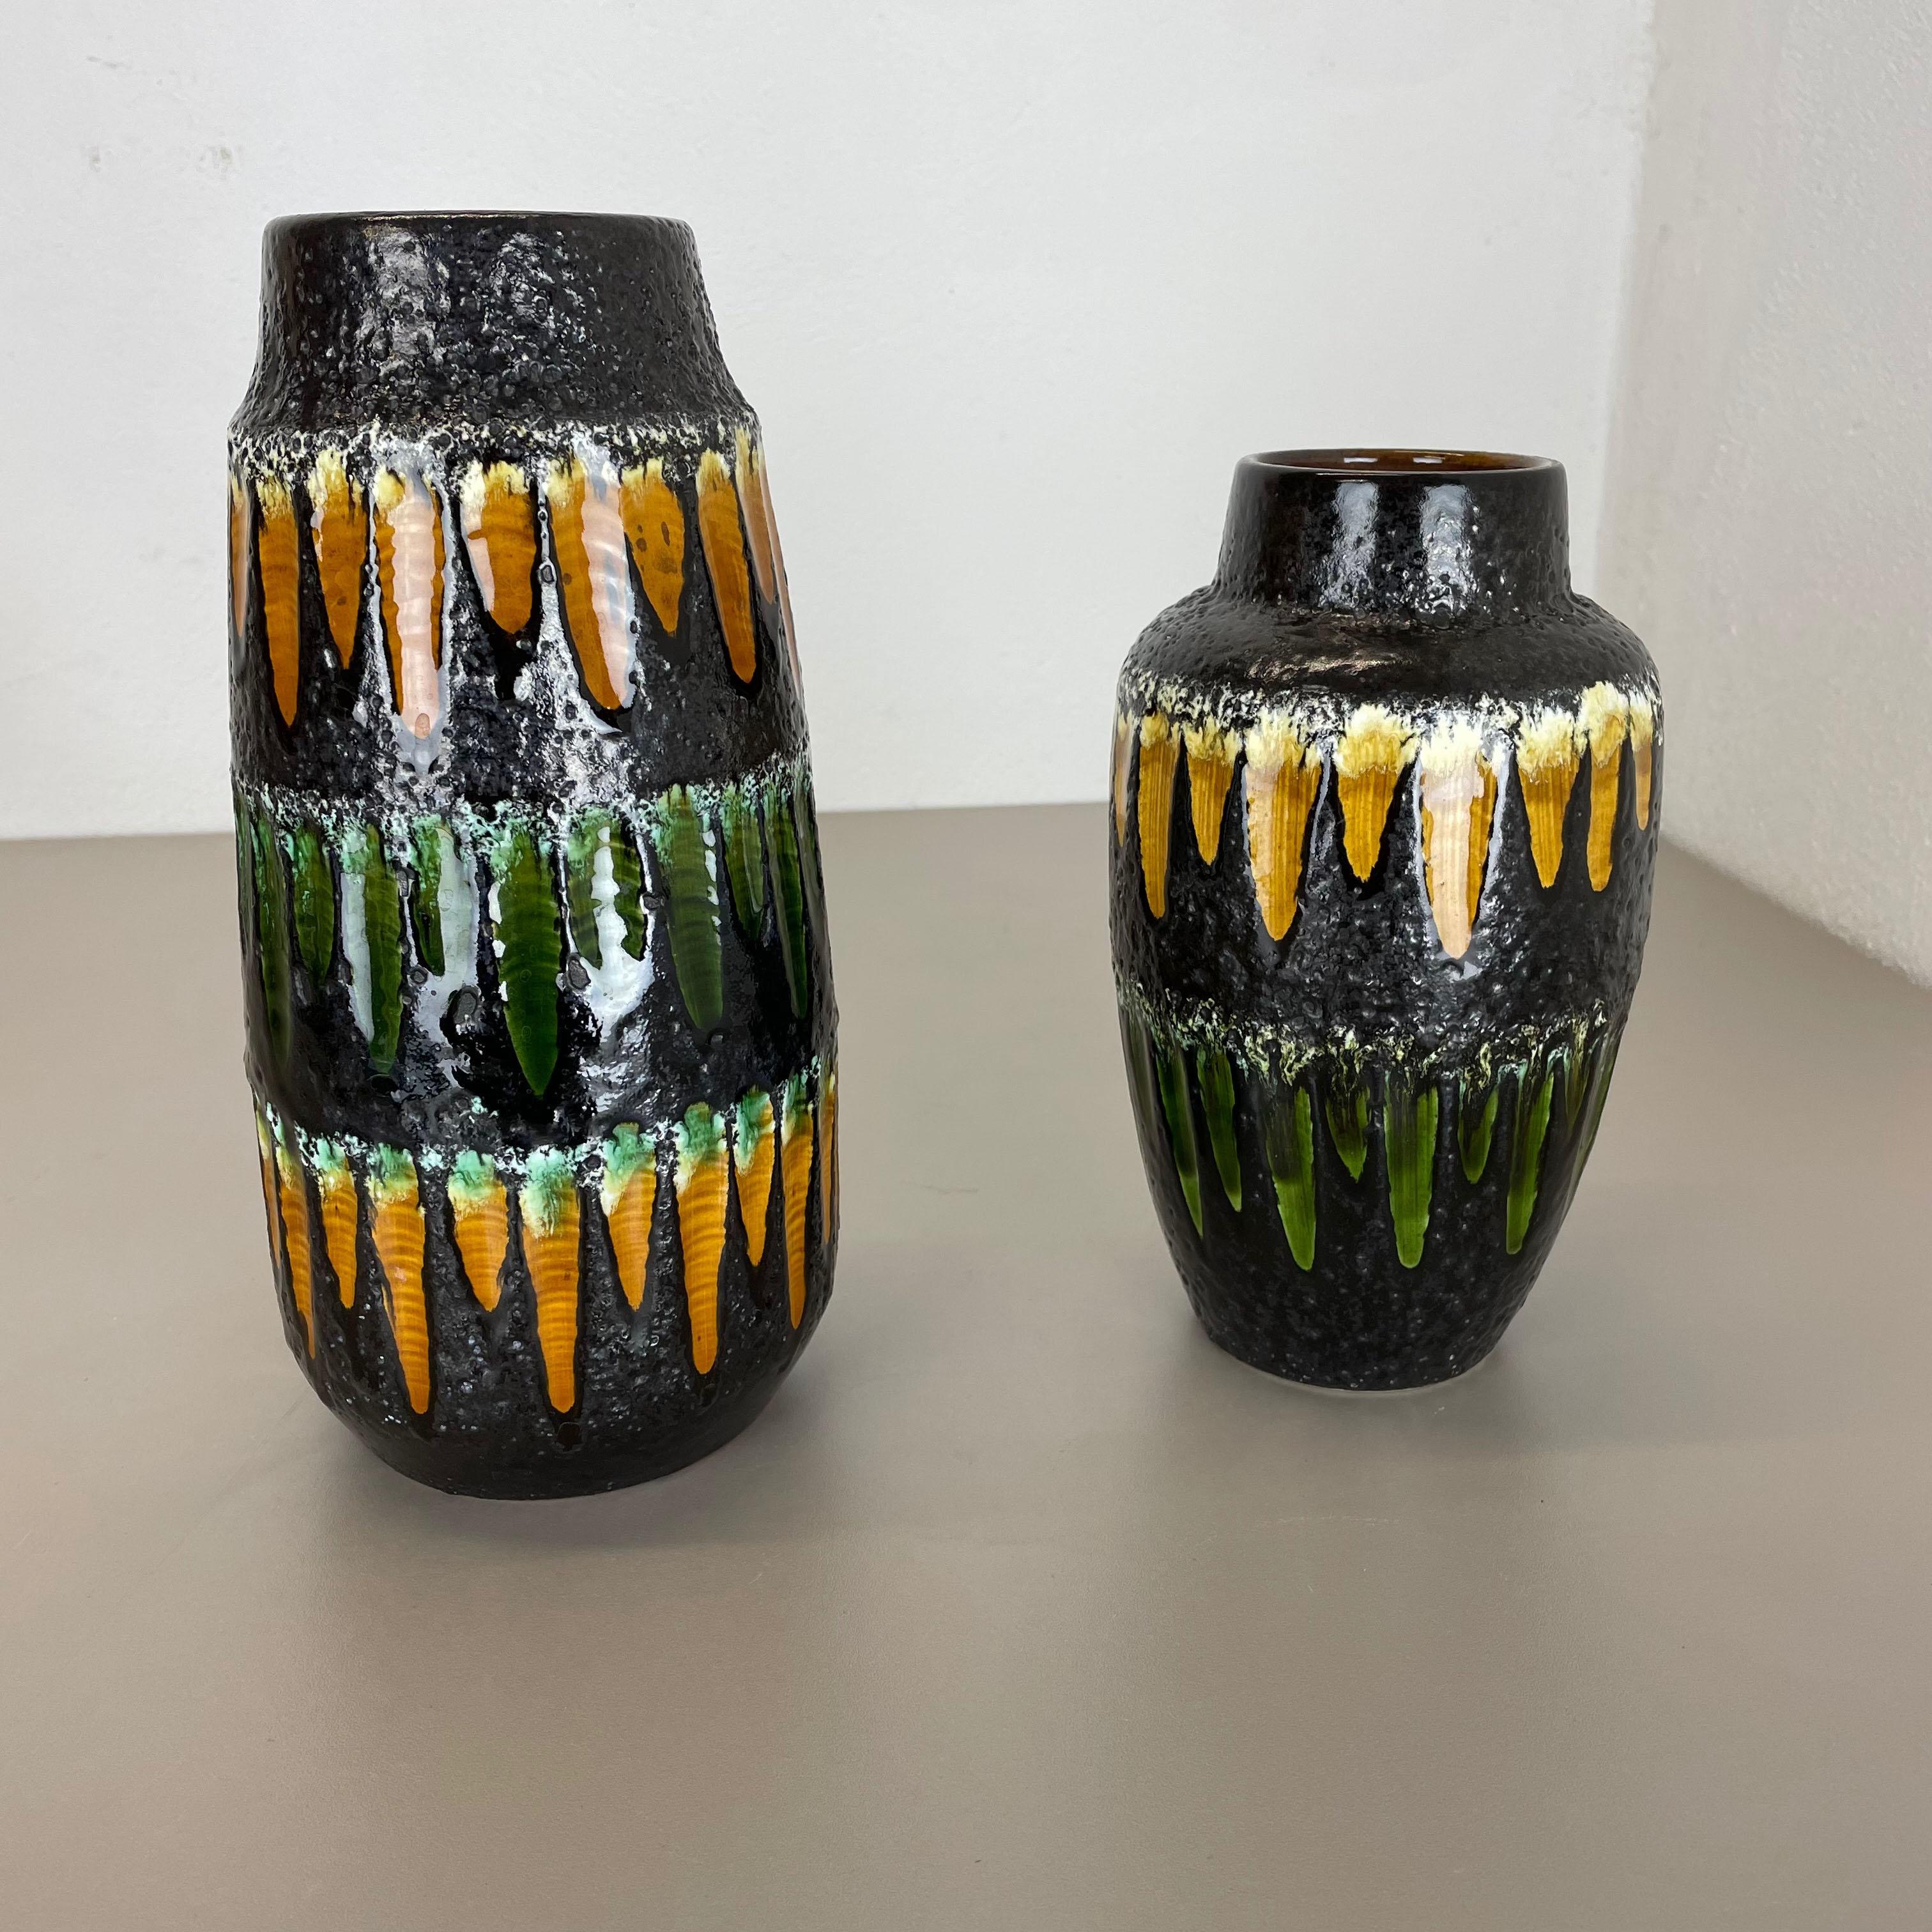 Article:

Fat lava art vase, heavy Brutalist glaze, set of 2


Producer:

Scheurich, Germany



Decade:

1970s




This original vintage vase set was produced in the 1970s in Germany. It is made of ceramic pottery in fat lava optic with abstract